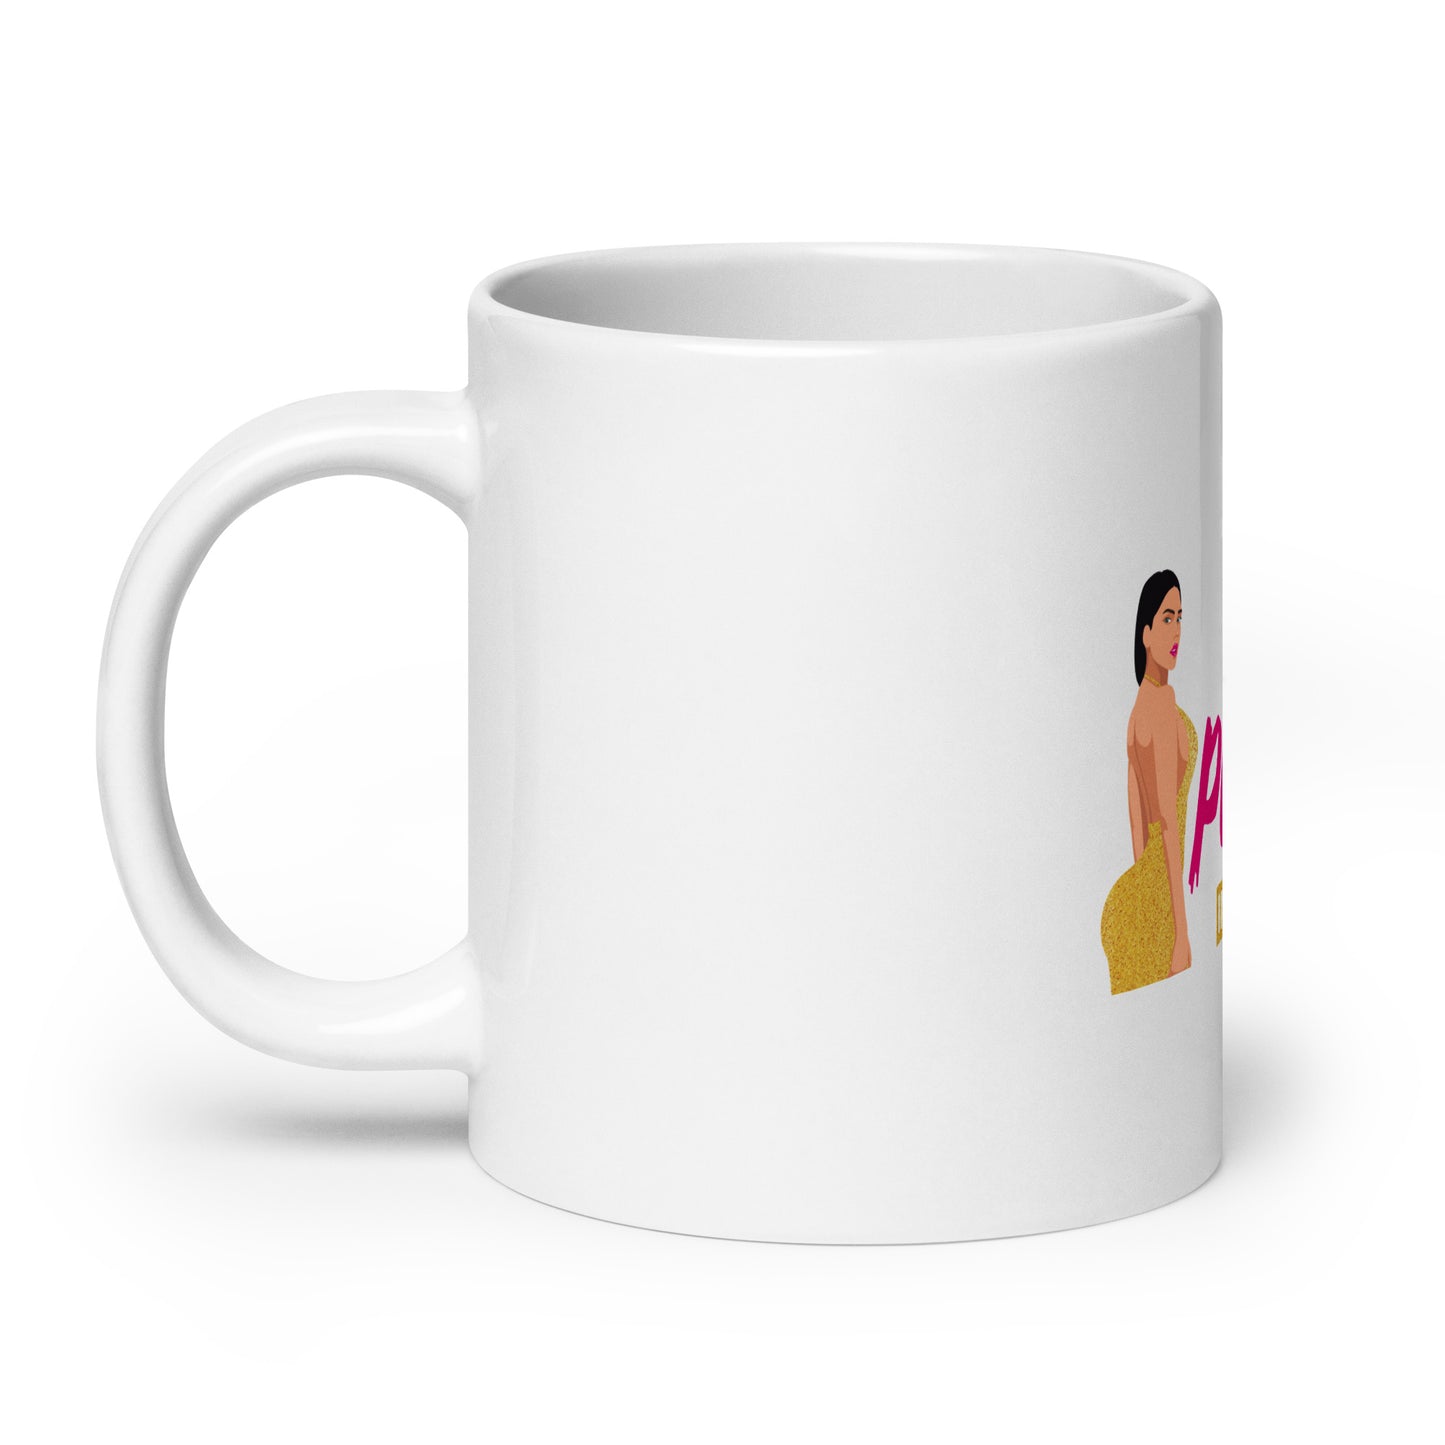 There is Power in The Hip White glossy mug